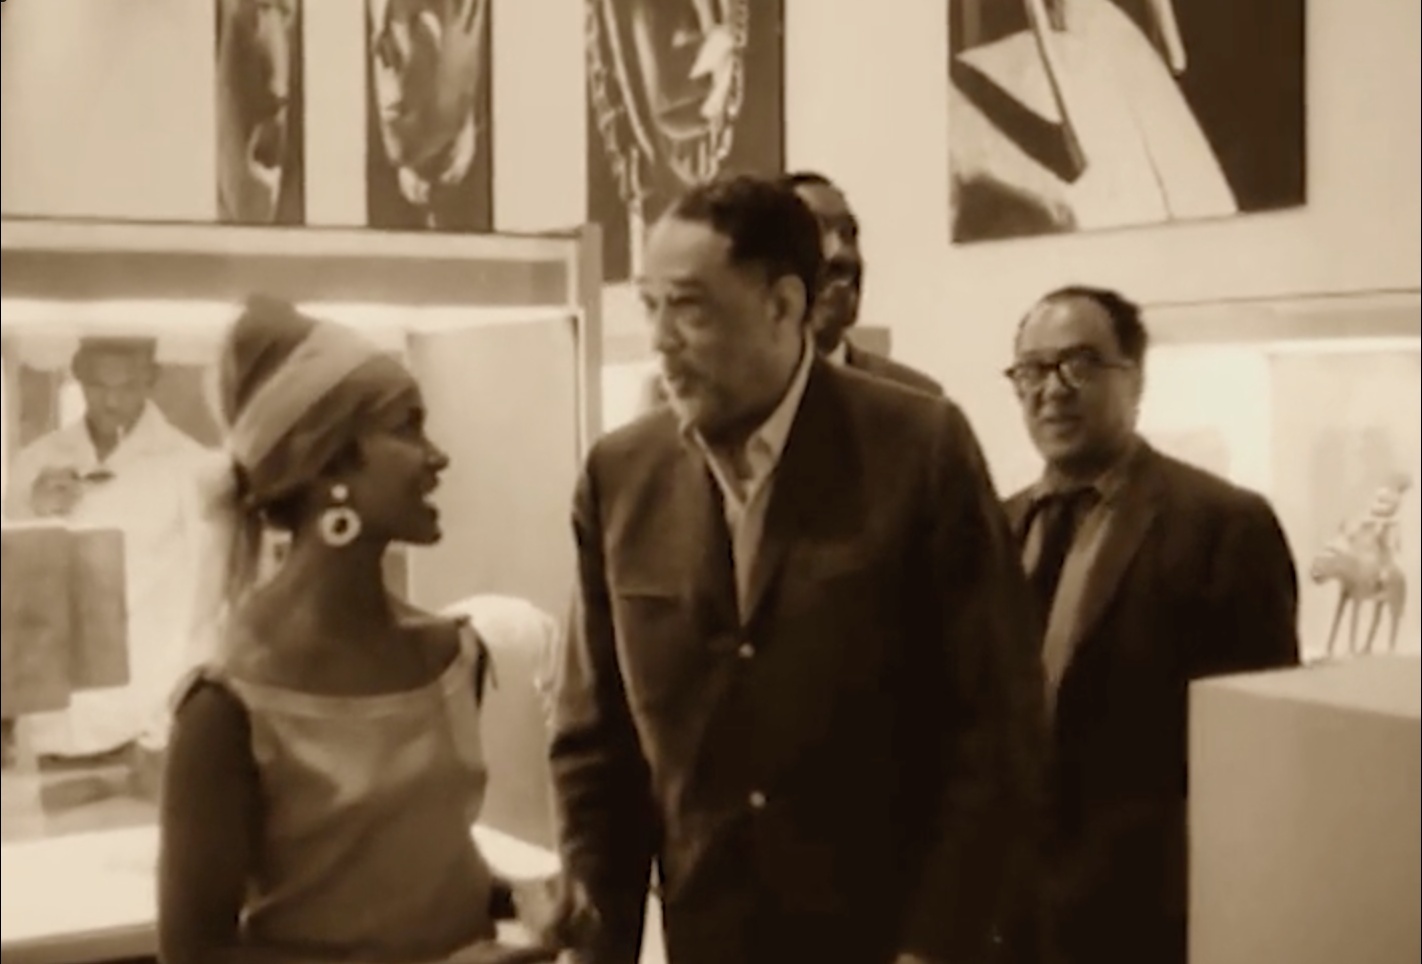 A still from a black-and-white documentary film, showing a woman and three men in a gallery viewing African art